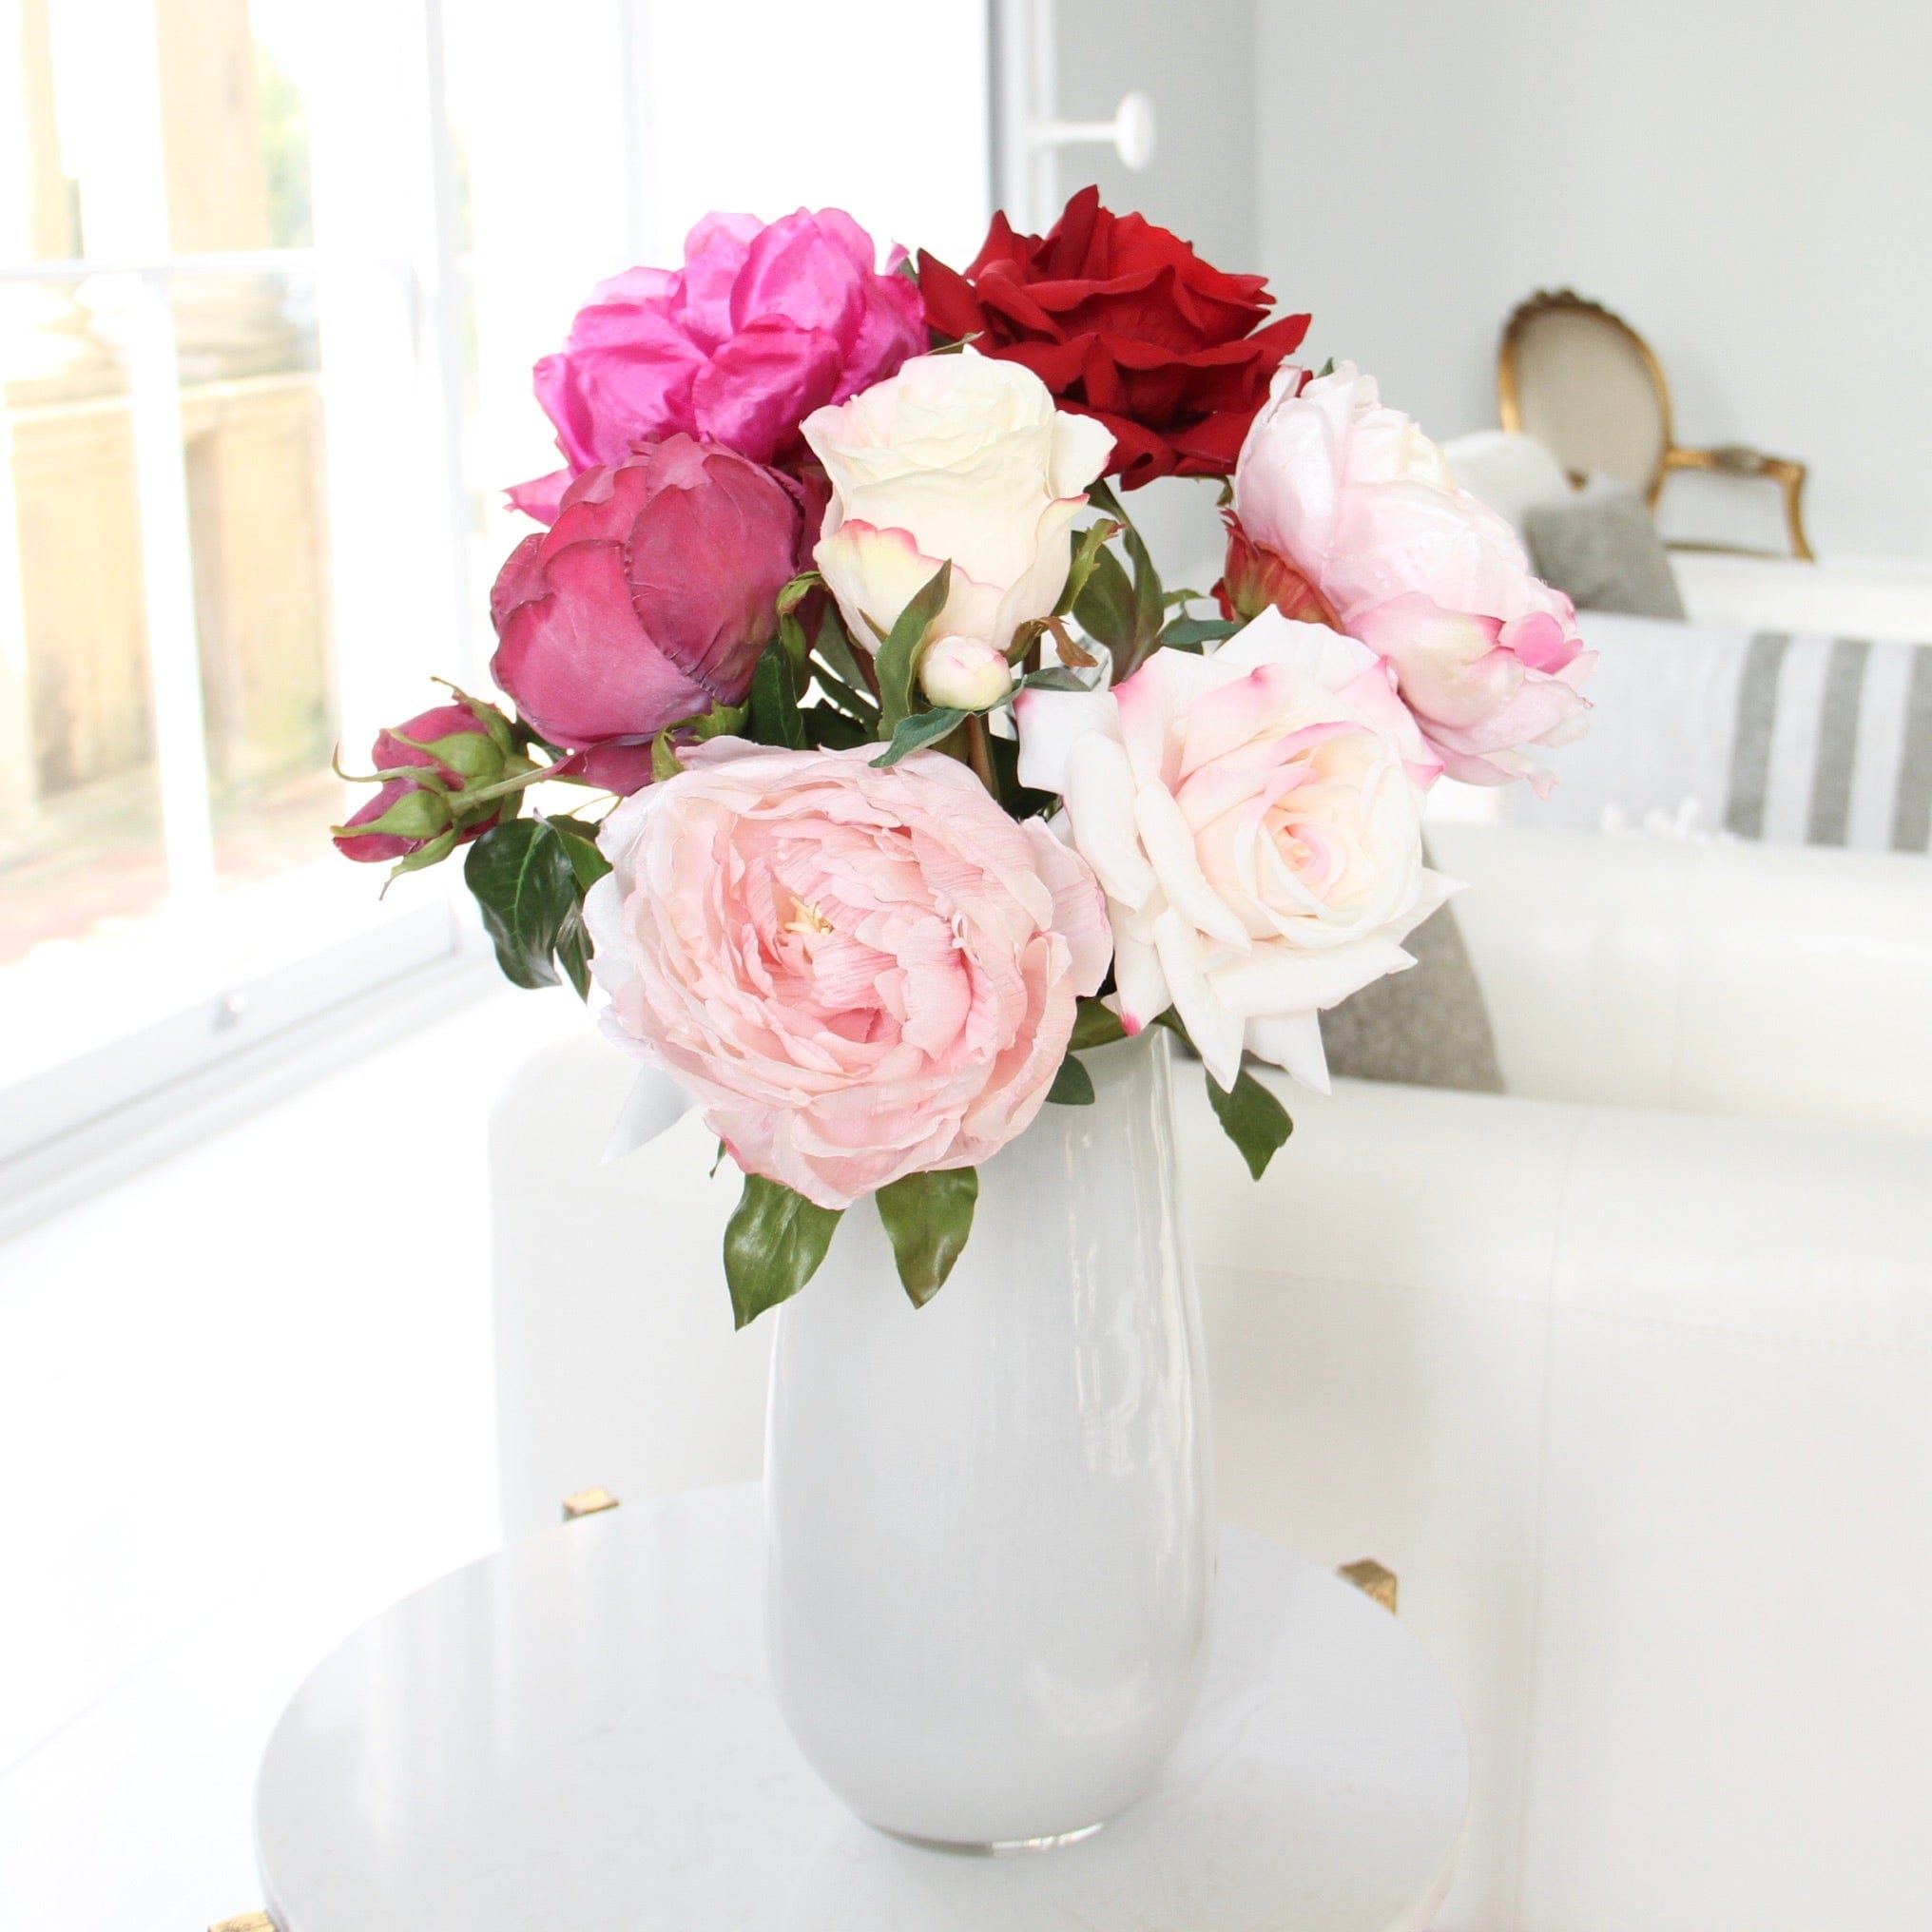 Artificial flowers luxury faux pink red roses and peonies lifelike realistic faux flowers buy online from Amaranthine Blooms UK shades of love bouquet